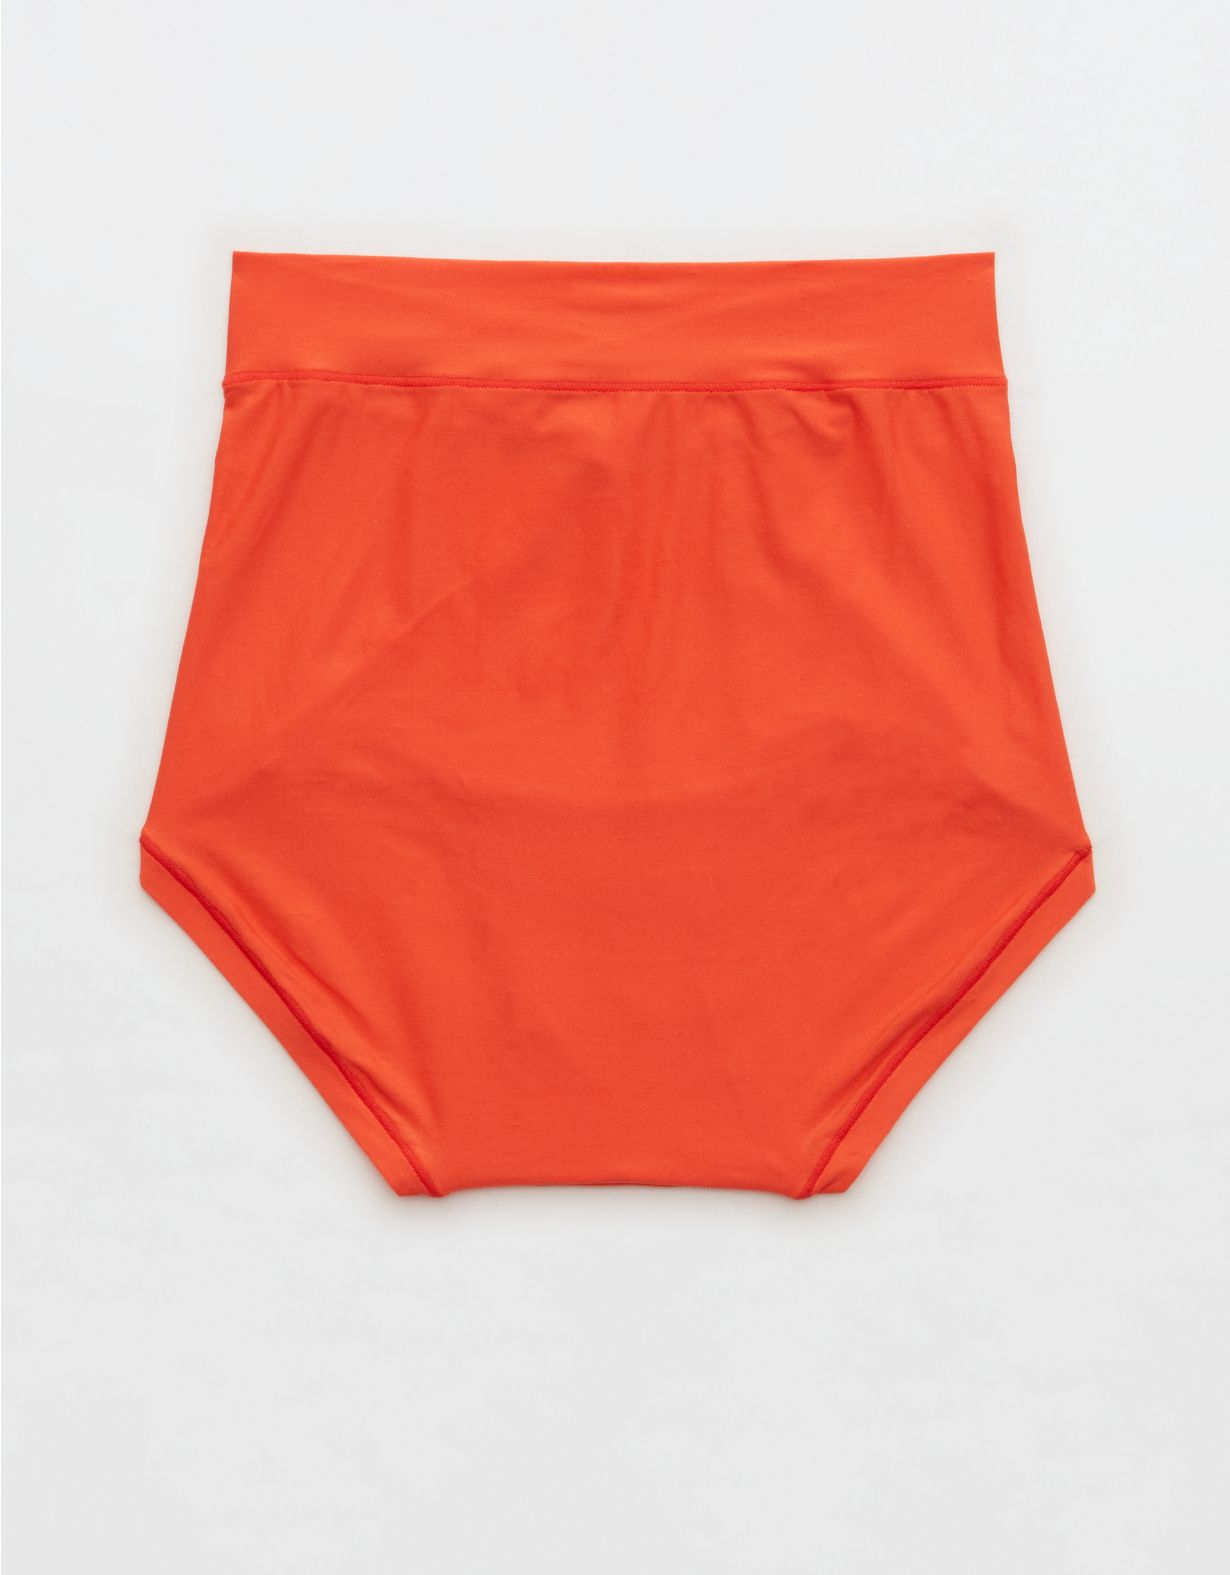 Aerie Real Me Crossover High Waisted Boybrief Underwear